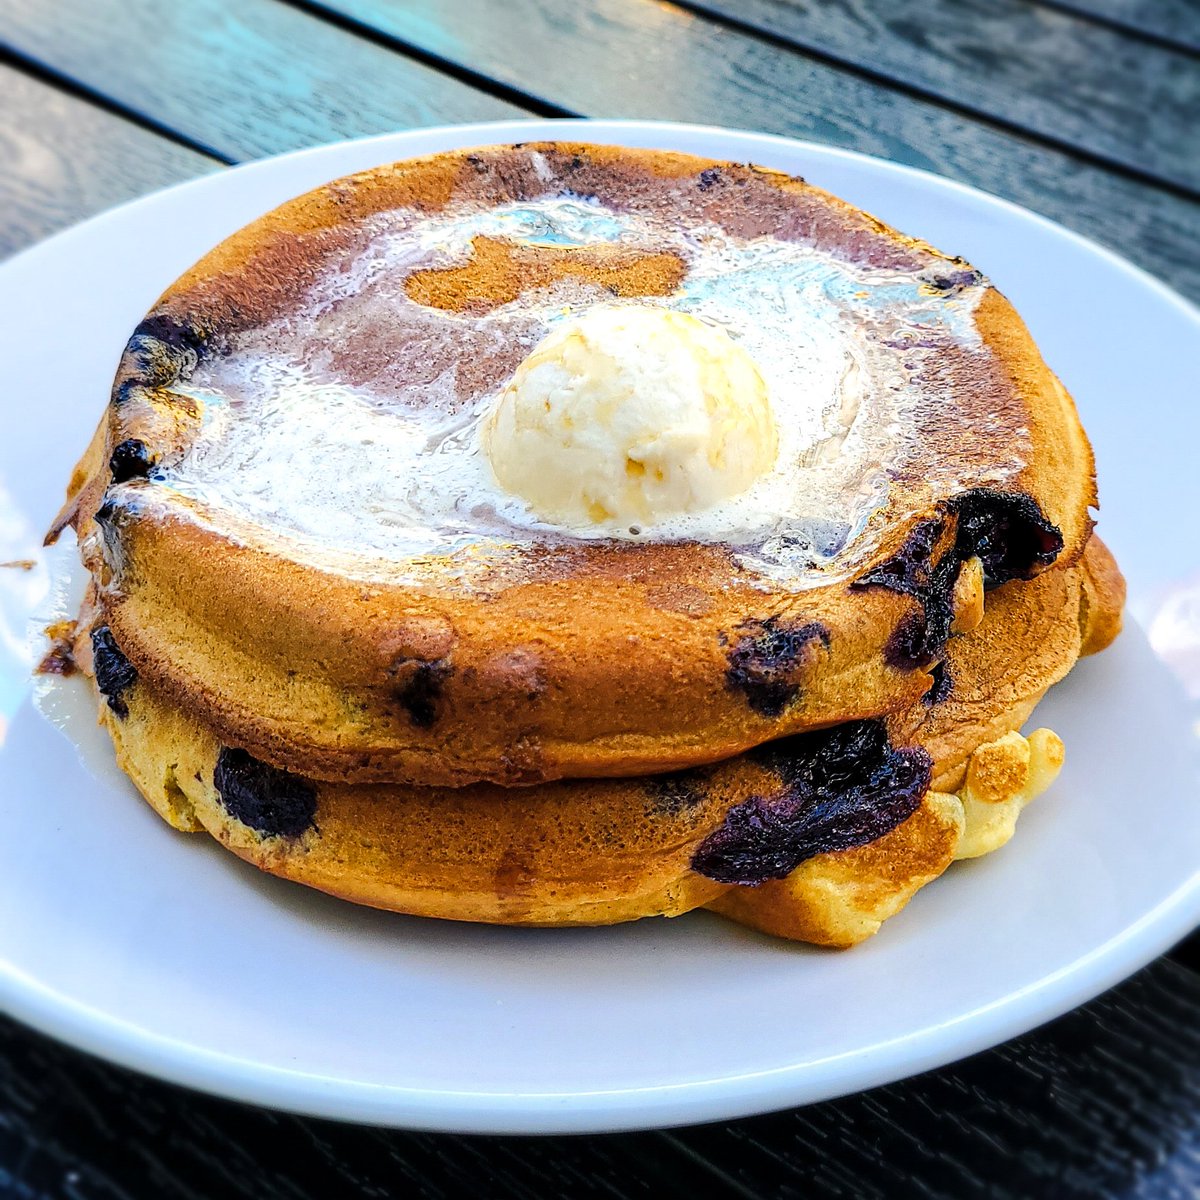 🥞🥞🥞 Blueberry Skillet Pancakes on the brunch menu today! You still have time to grab this stack of fluffy goodness before we switch over to our normal menu. Brunch every Sunday, 11:00-2:30 🍳🧇🥞